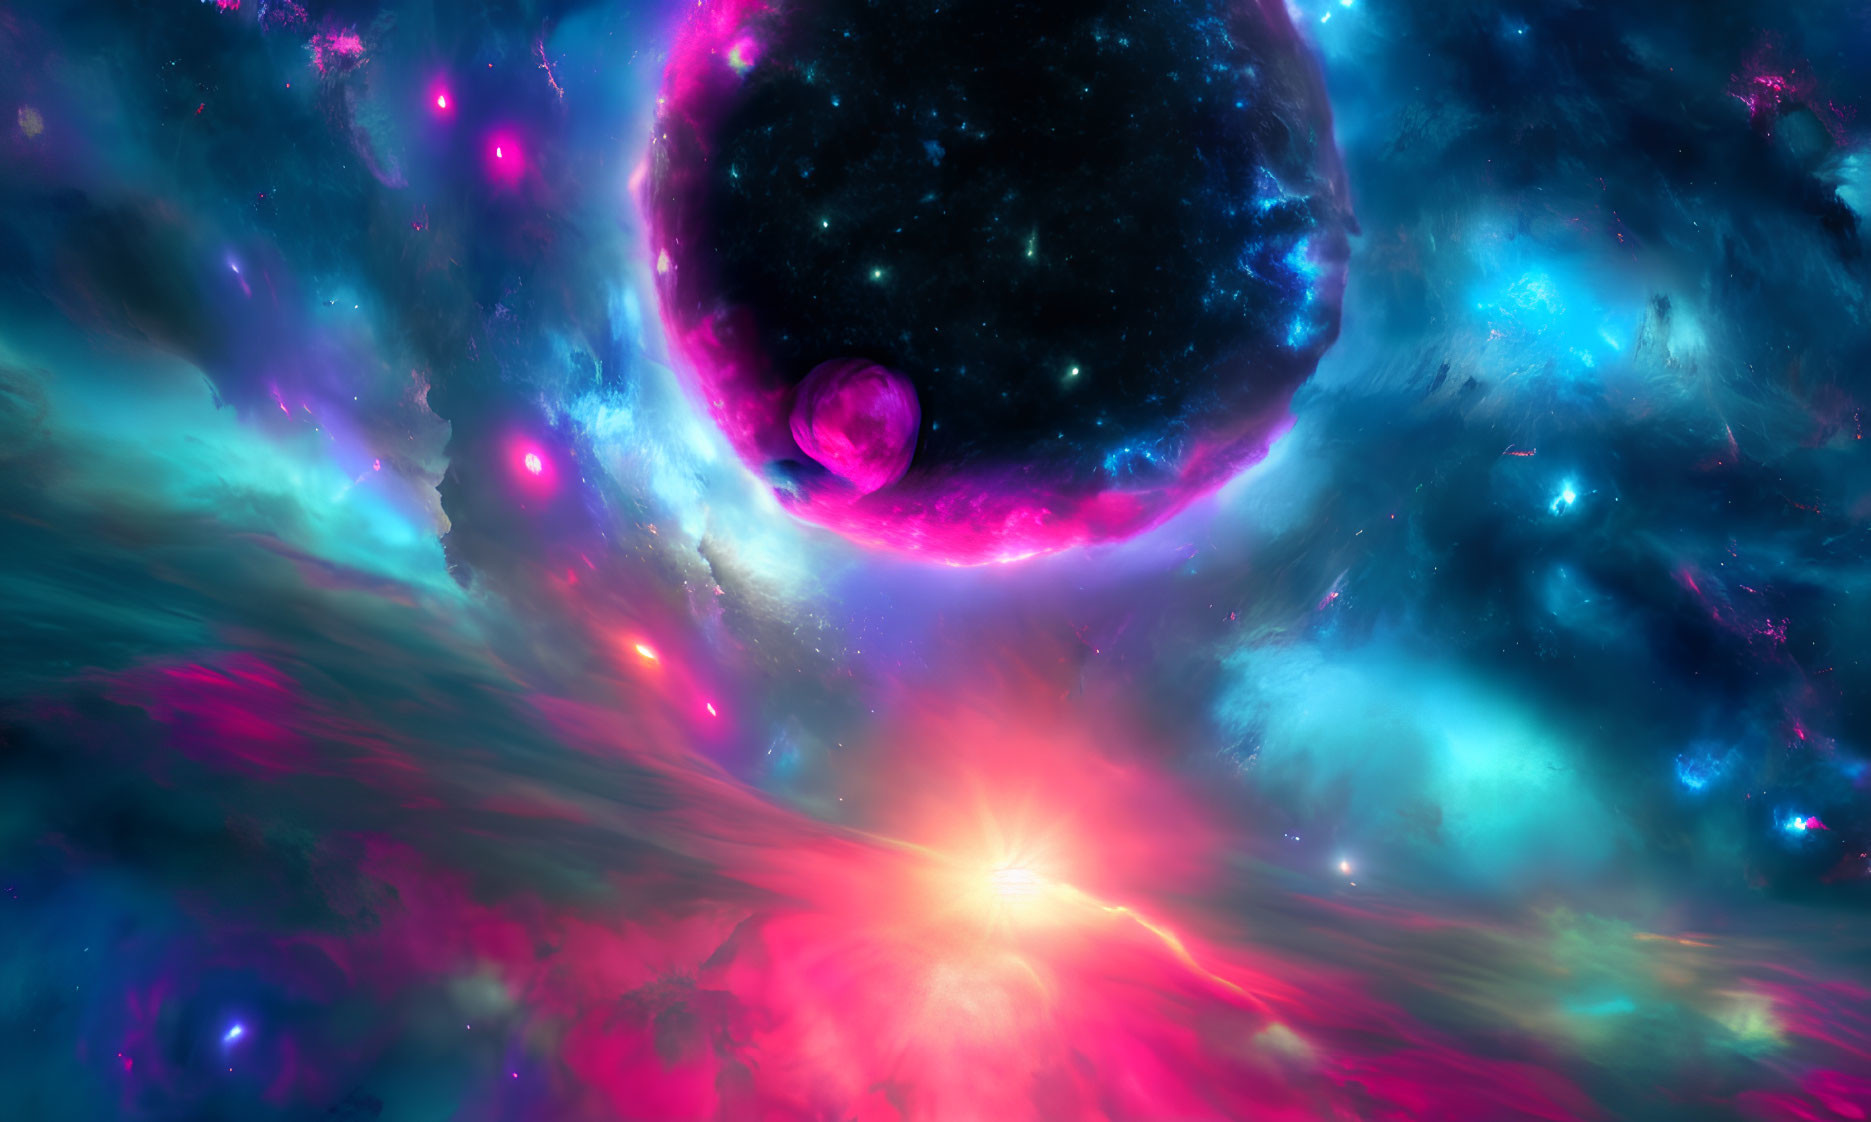 Colorful cosmic scene with glowing nebula and bright star